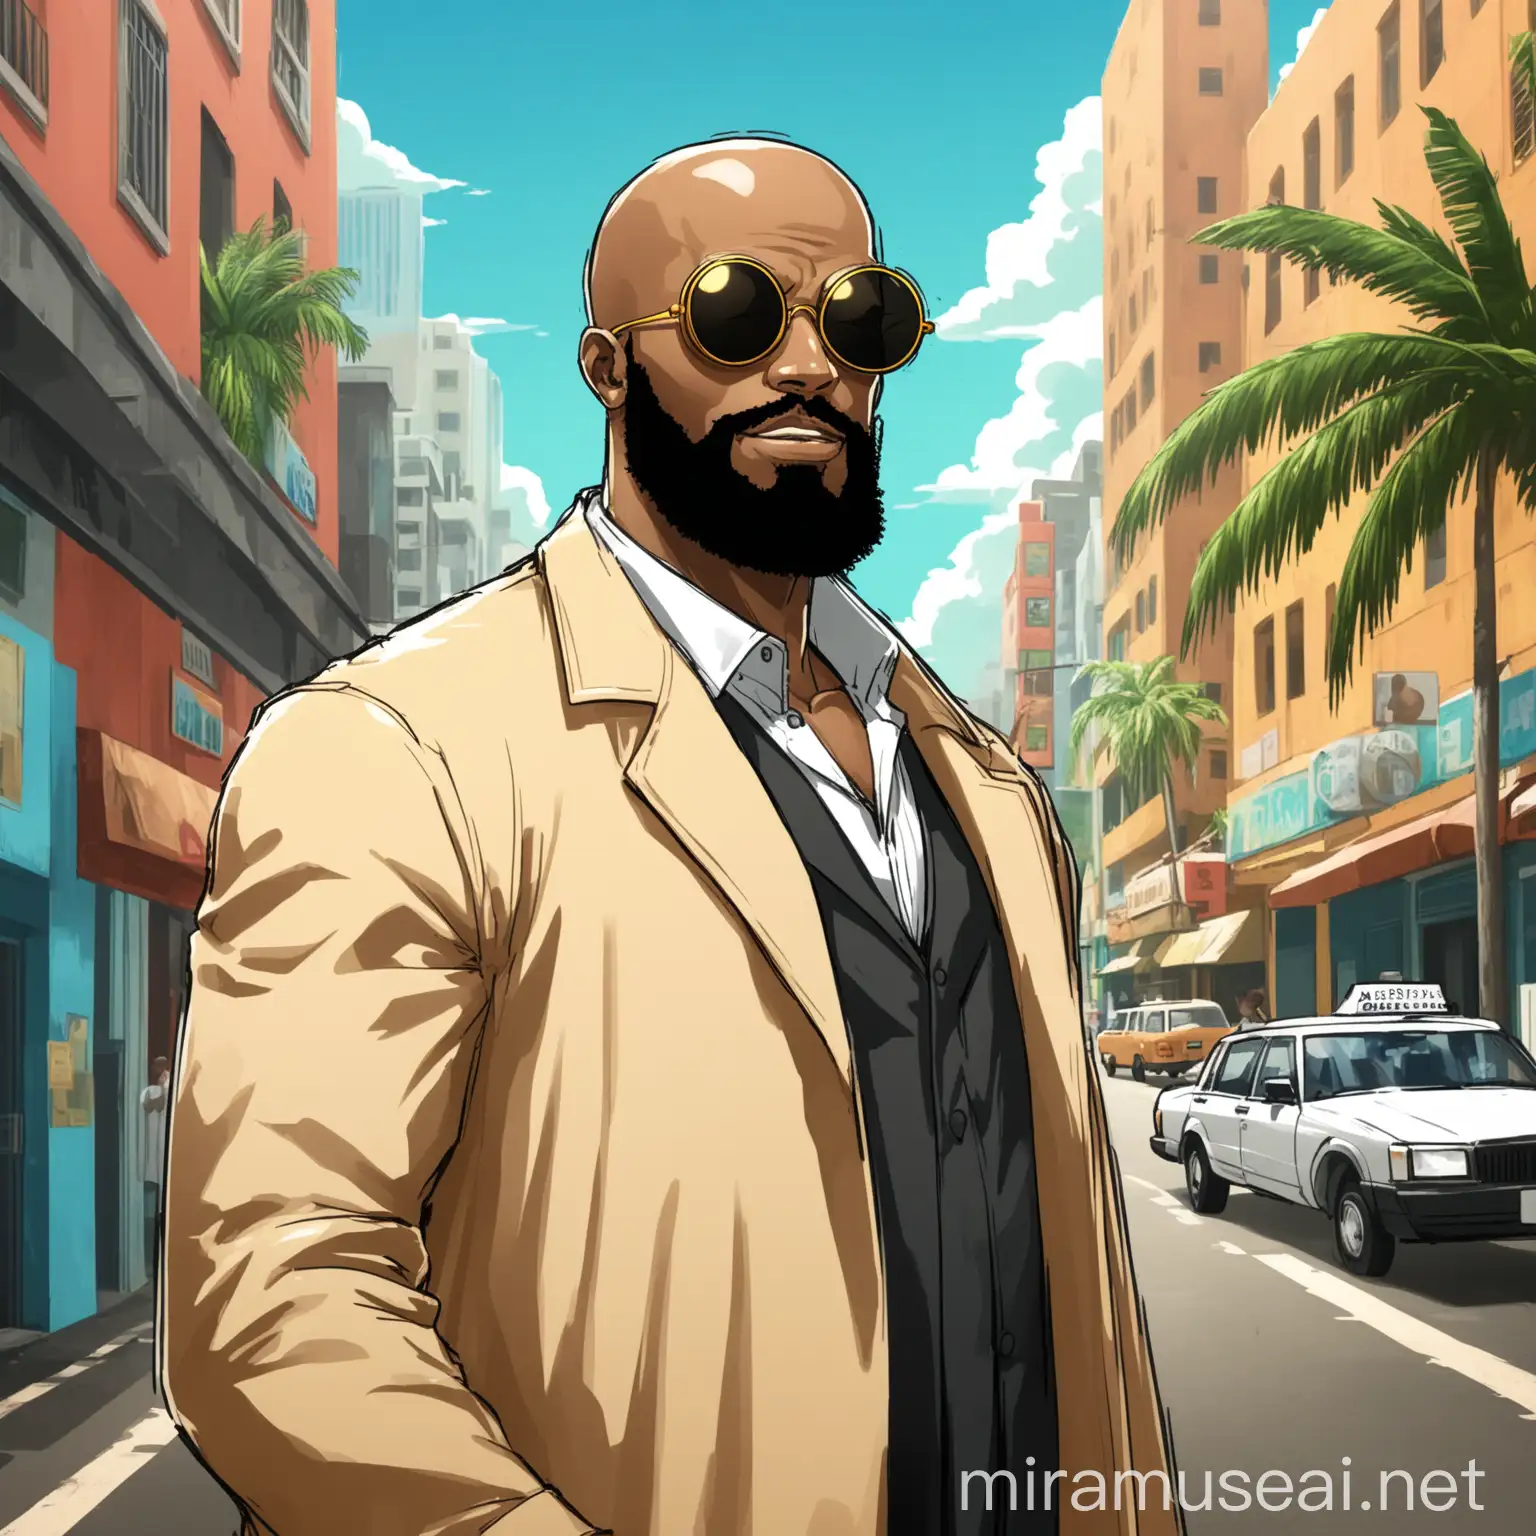 Bald Black Detective with Sunglasses in Urban Tropical City